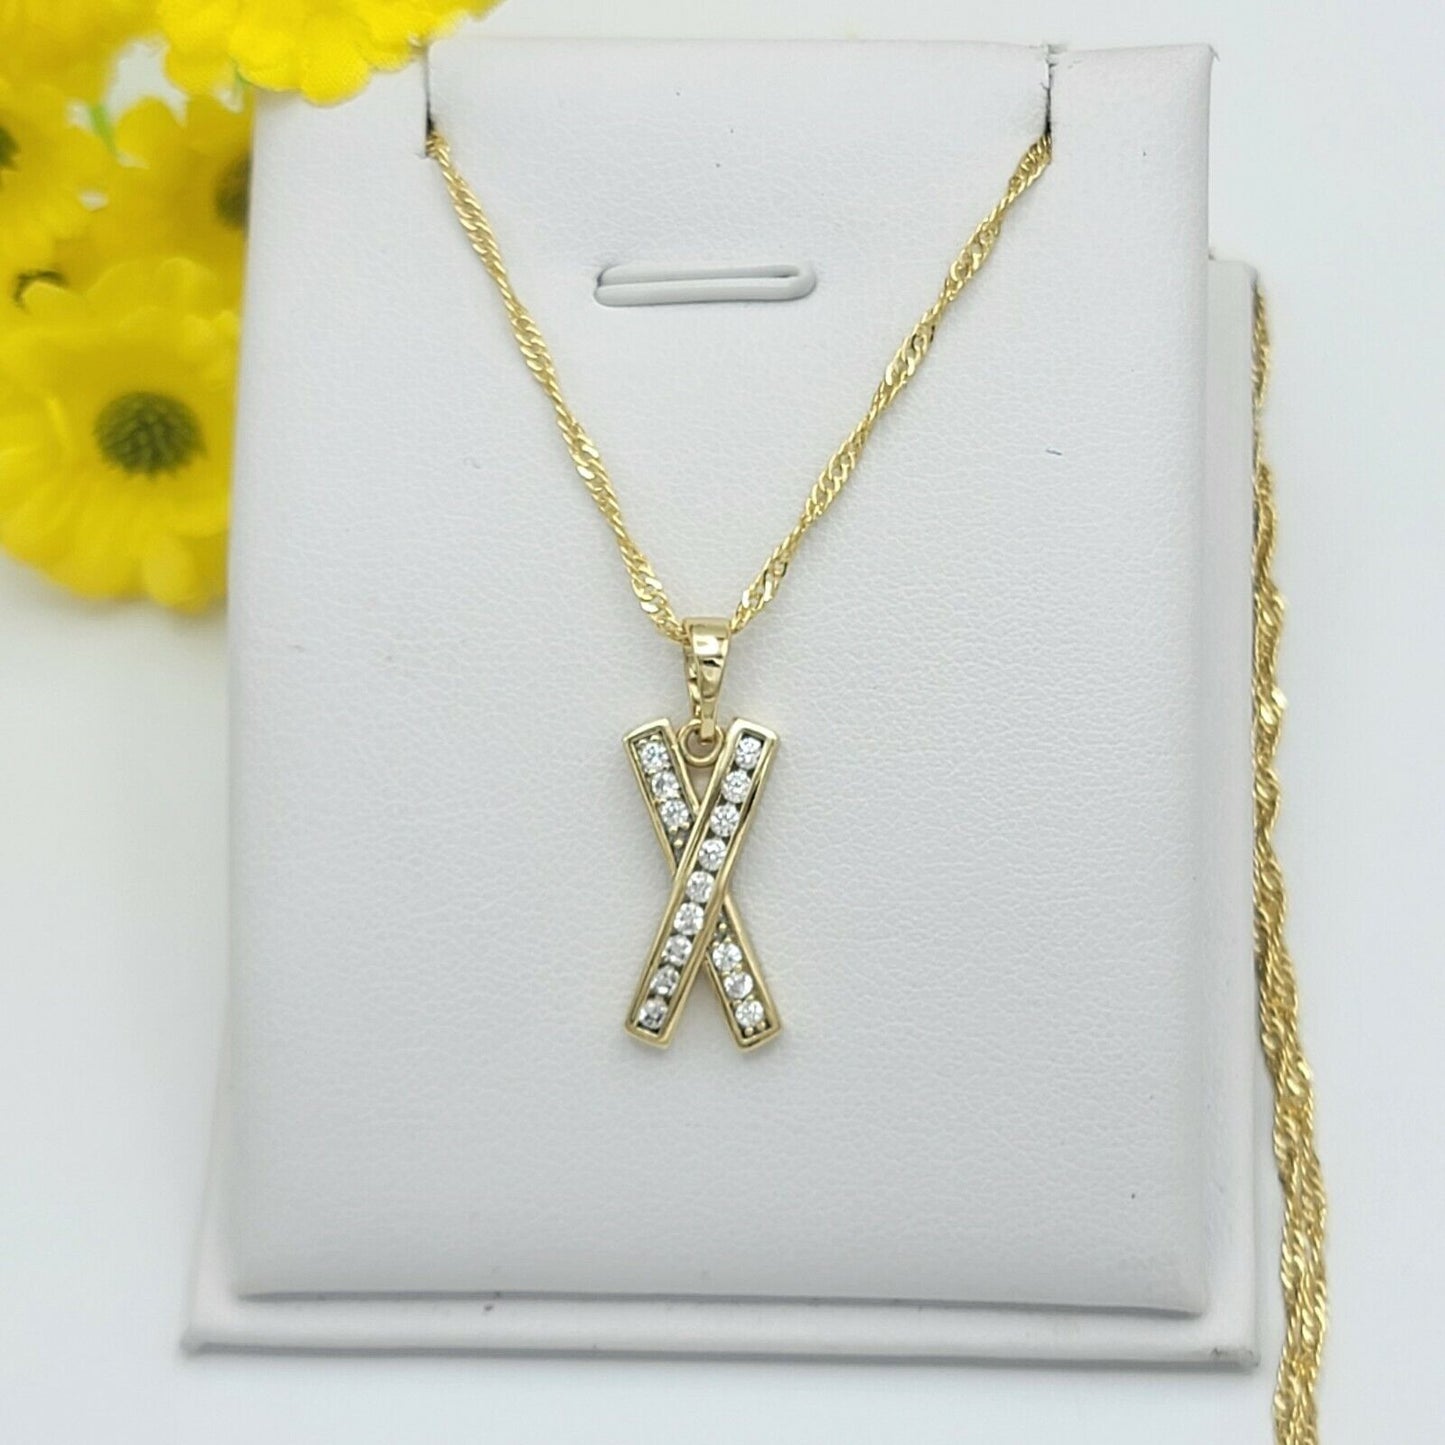 Necklaces - 14K Gold Plated. Icy crystal X Cross Ribbon Pendant & Chain.